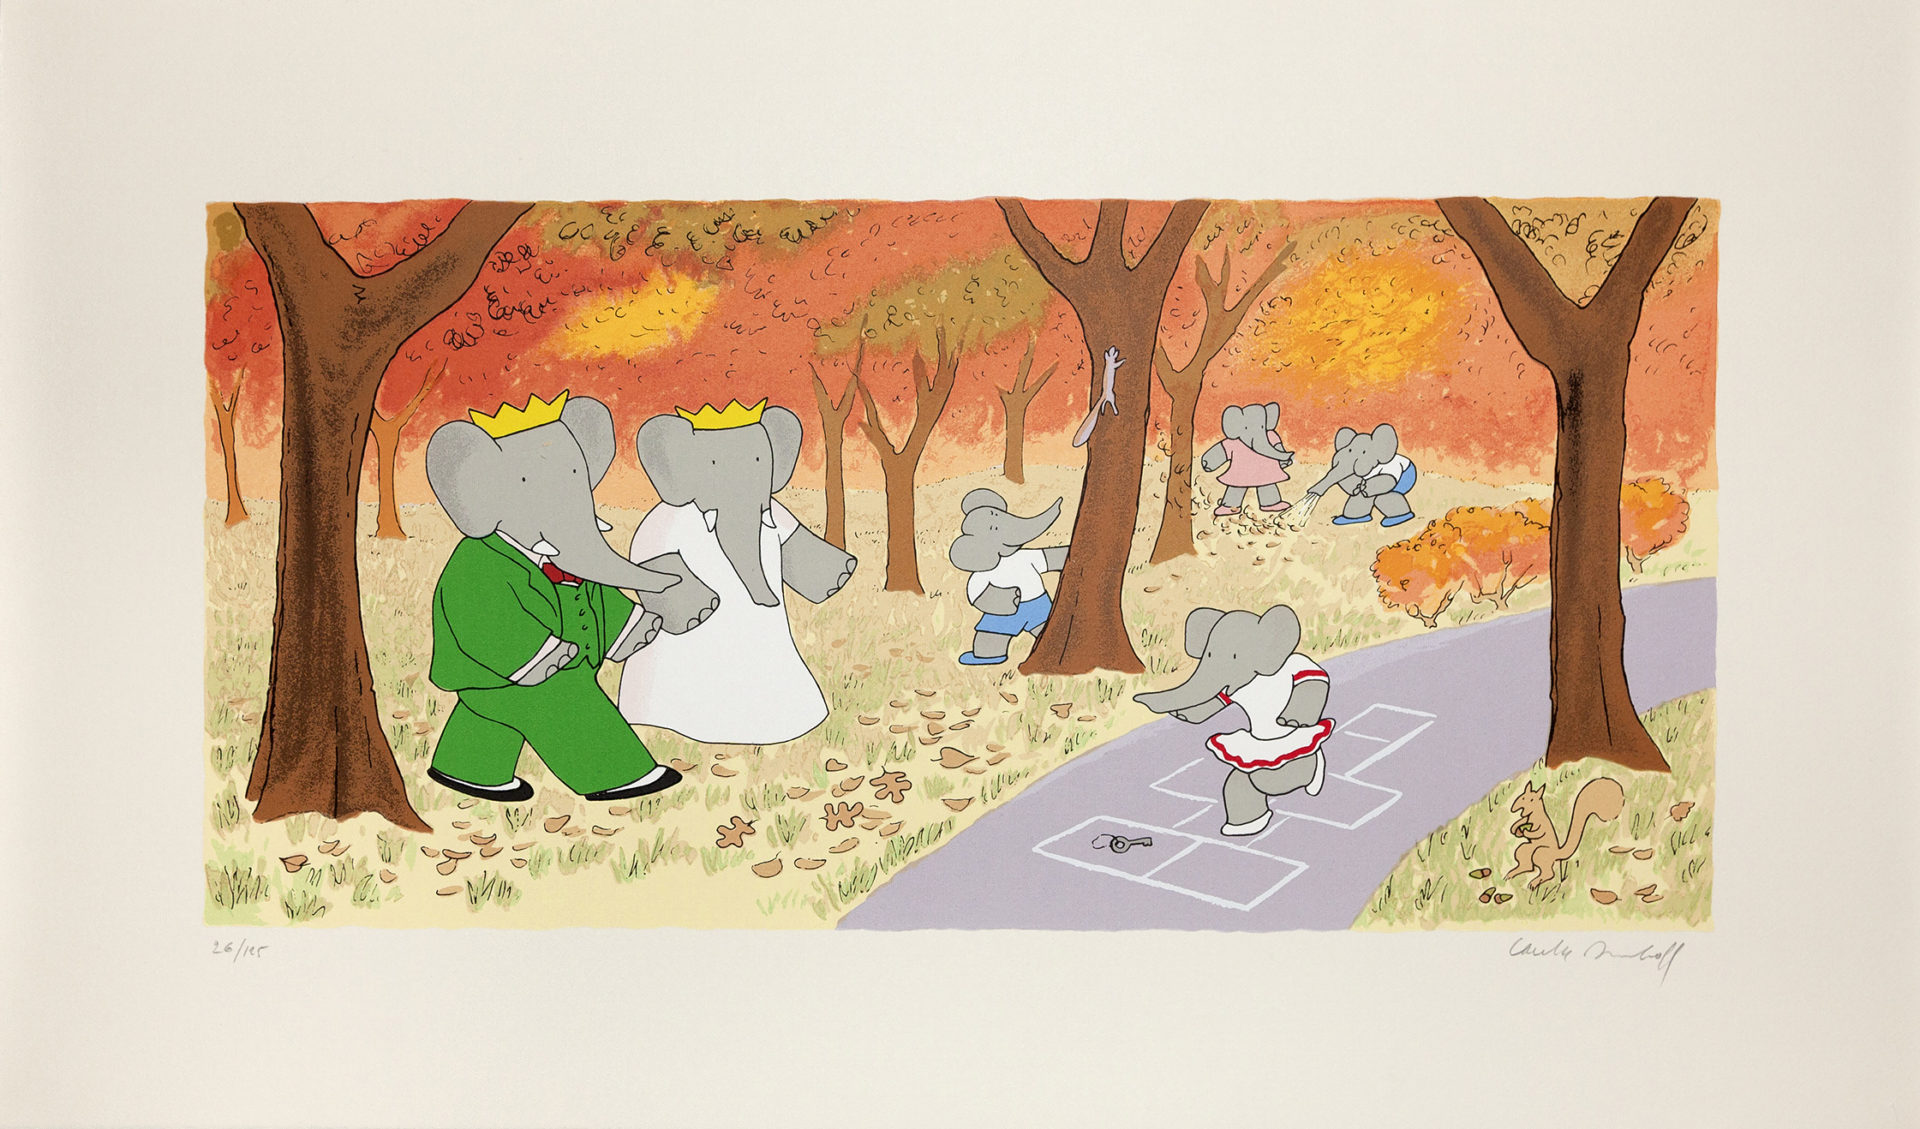 What Could Be Better Than Walking Through Leaves in Autumn?, 2008, Silkscreen, 16 1/2 x 28 1/4 inches (41.9 x 71.8 cm), Edition of 125